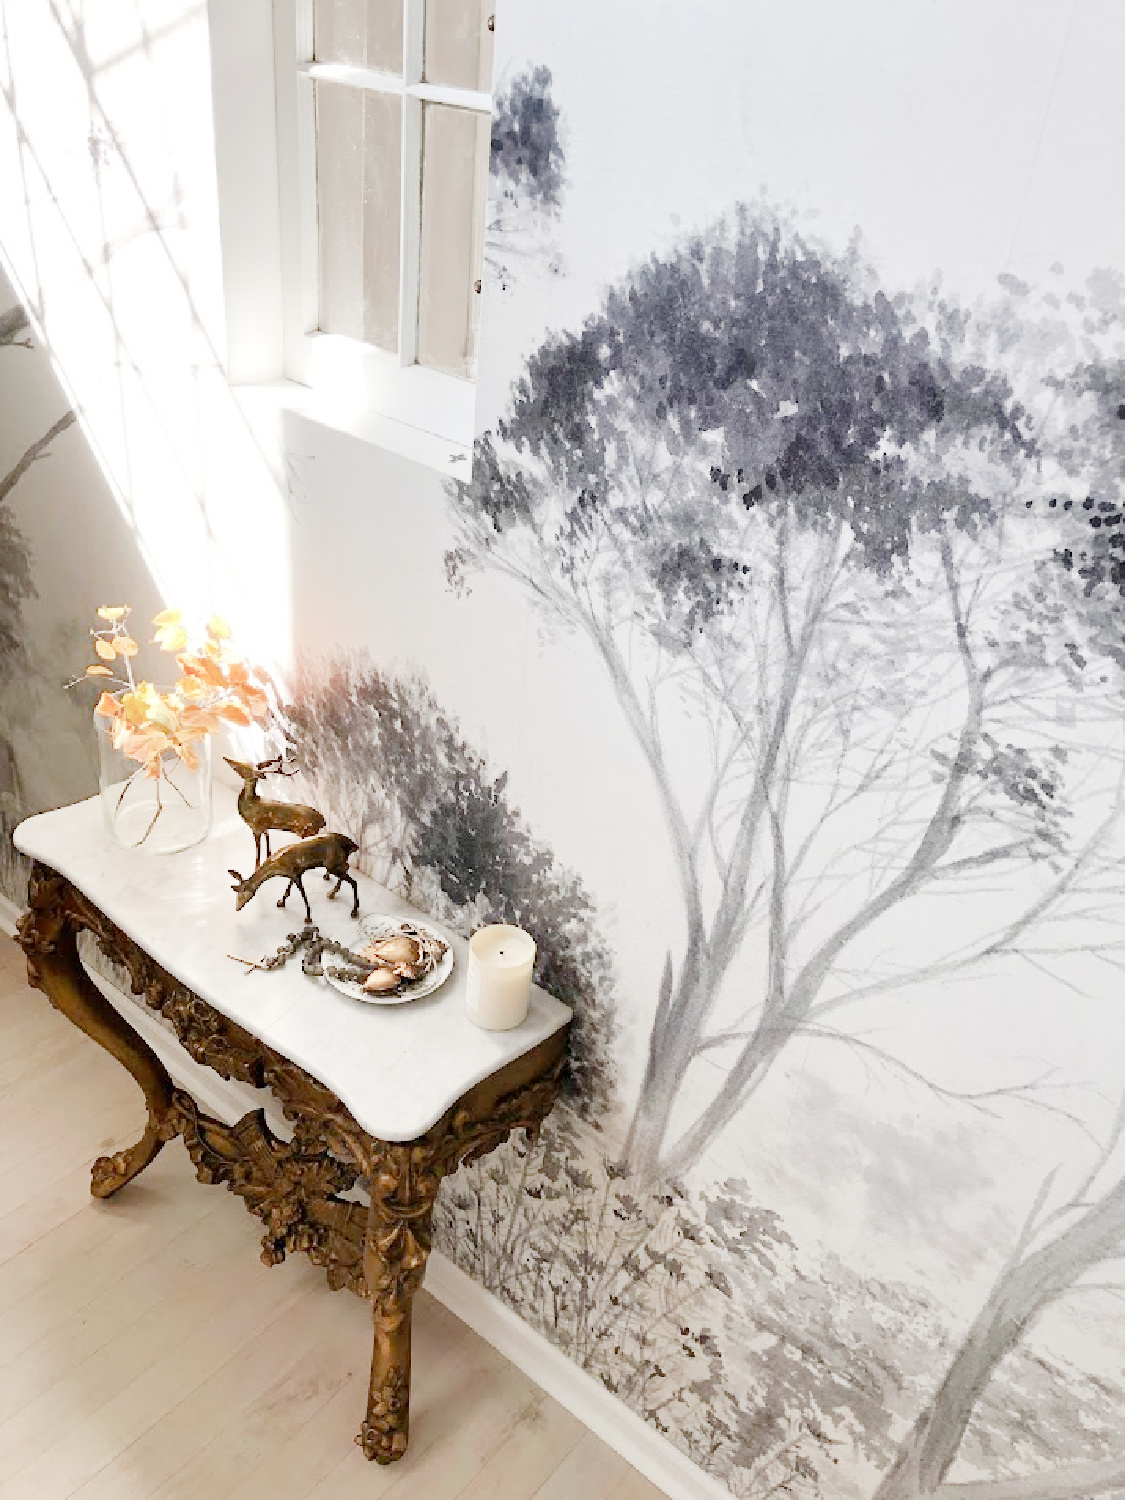 Antique French console with marble top in renovated entry with tree wallpaper mural - Hello Lovely Studio.